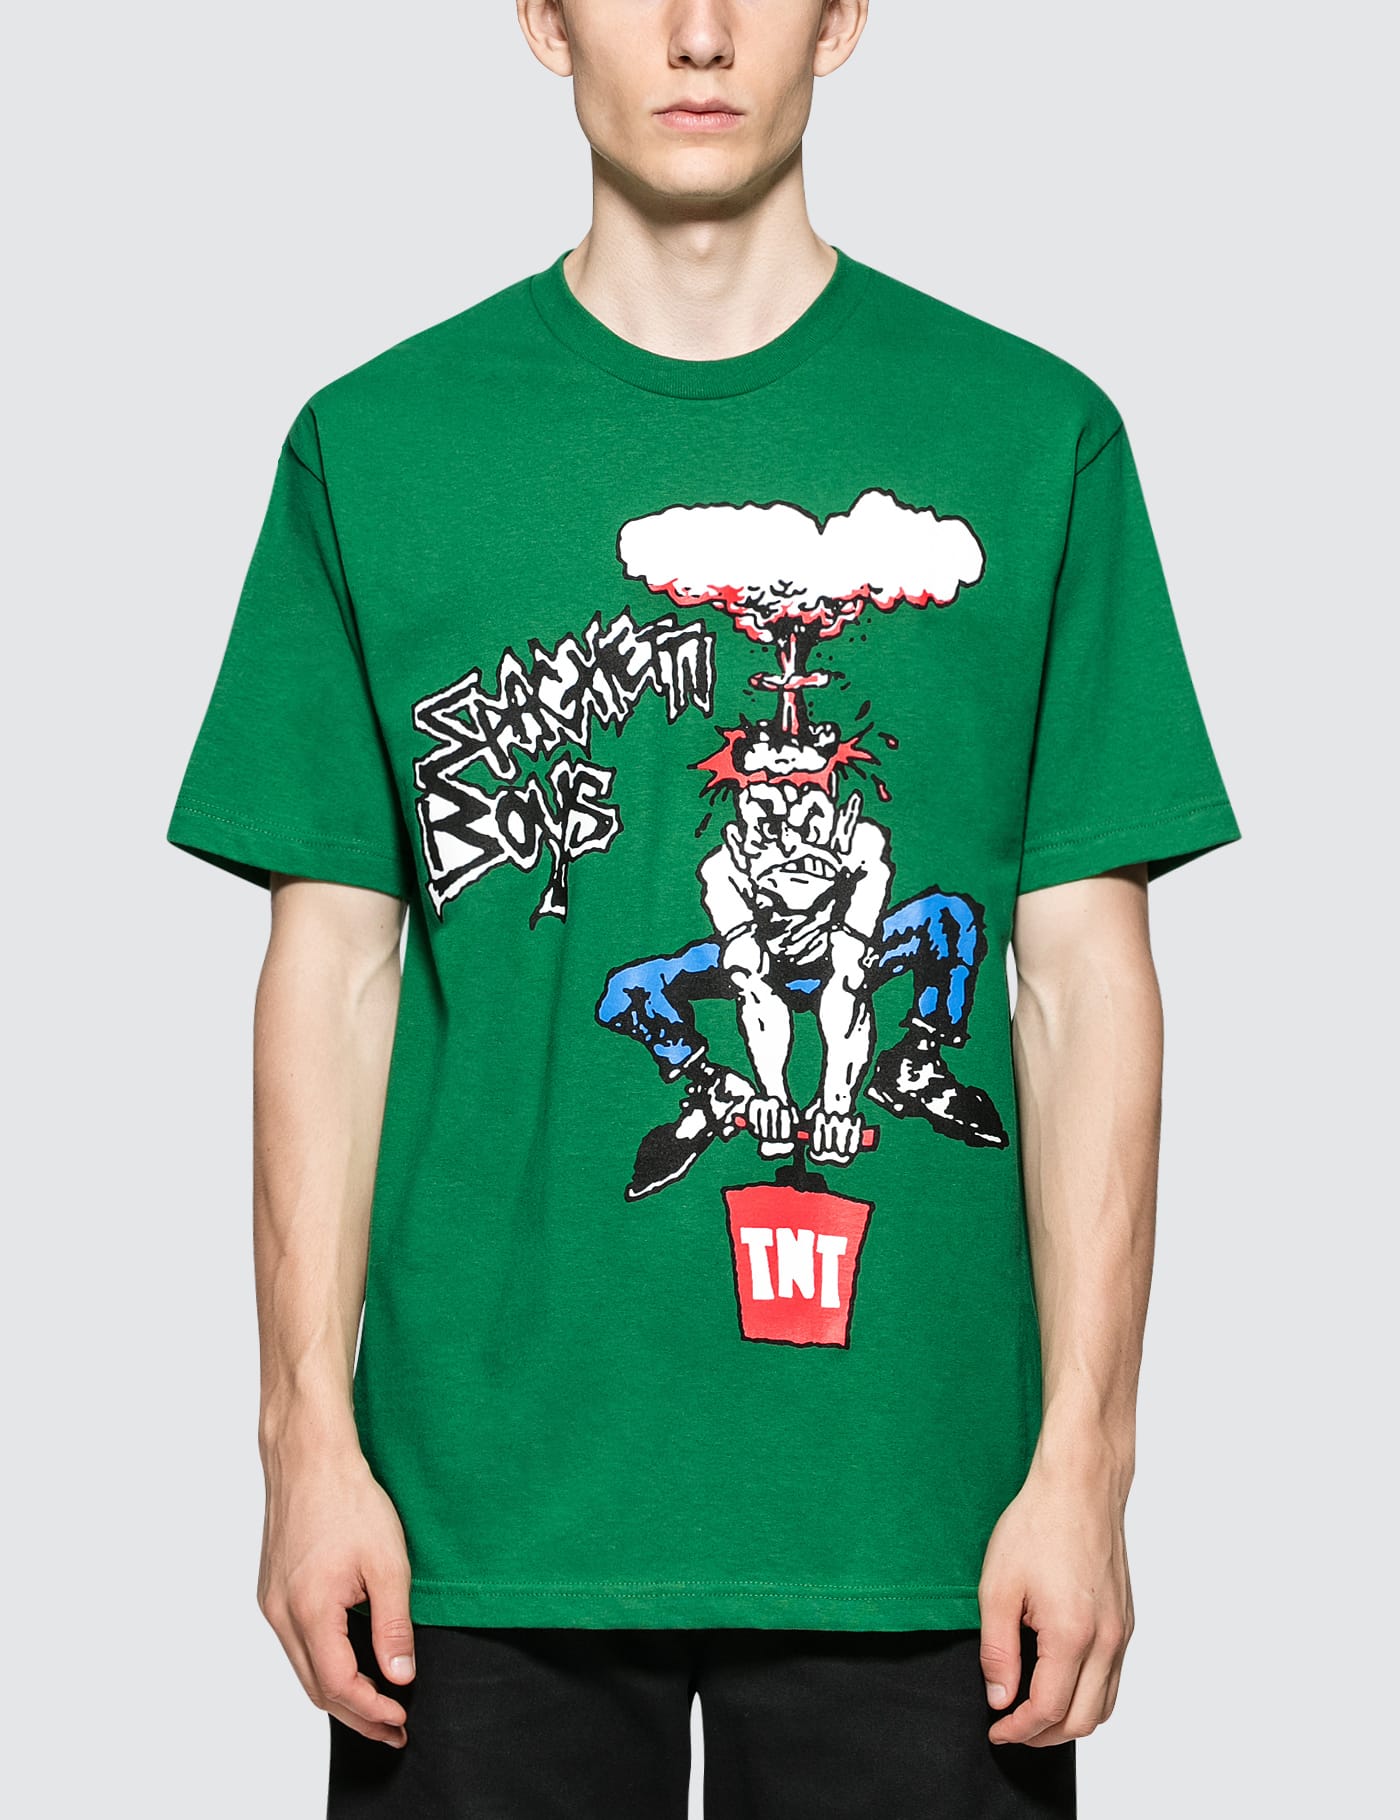 Spaghetti Boys - No Minds To Lost T-Shirt | HBX - Globally Curated 